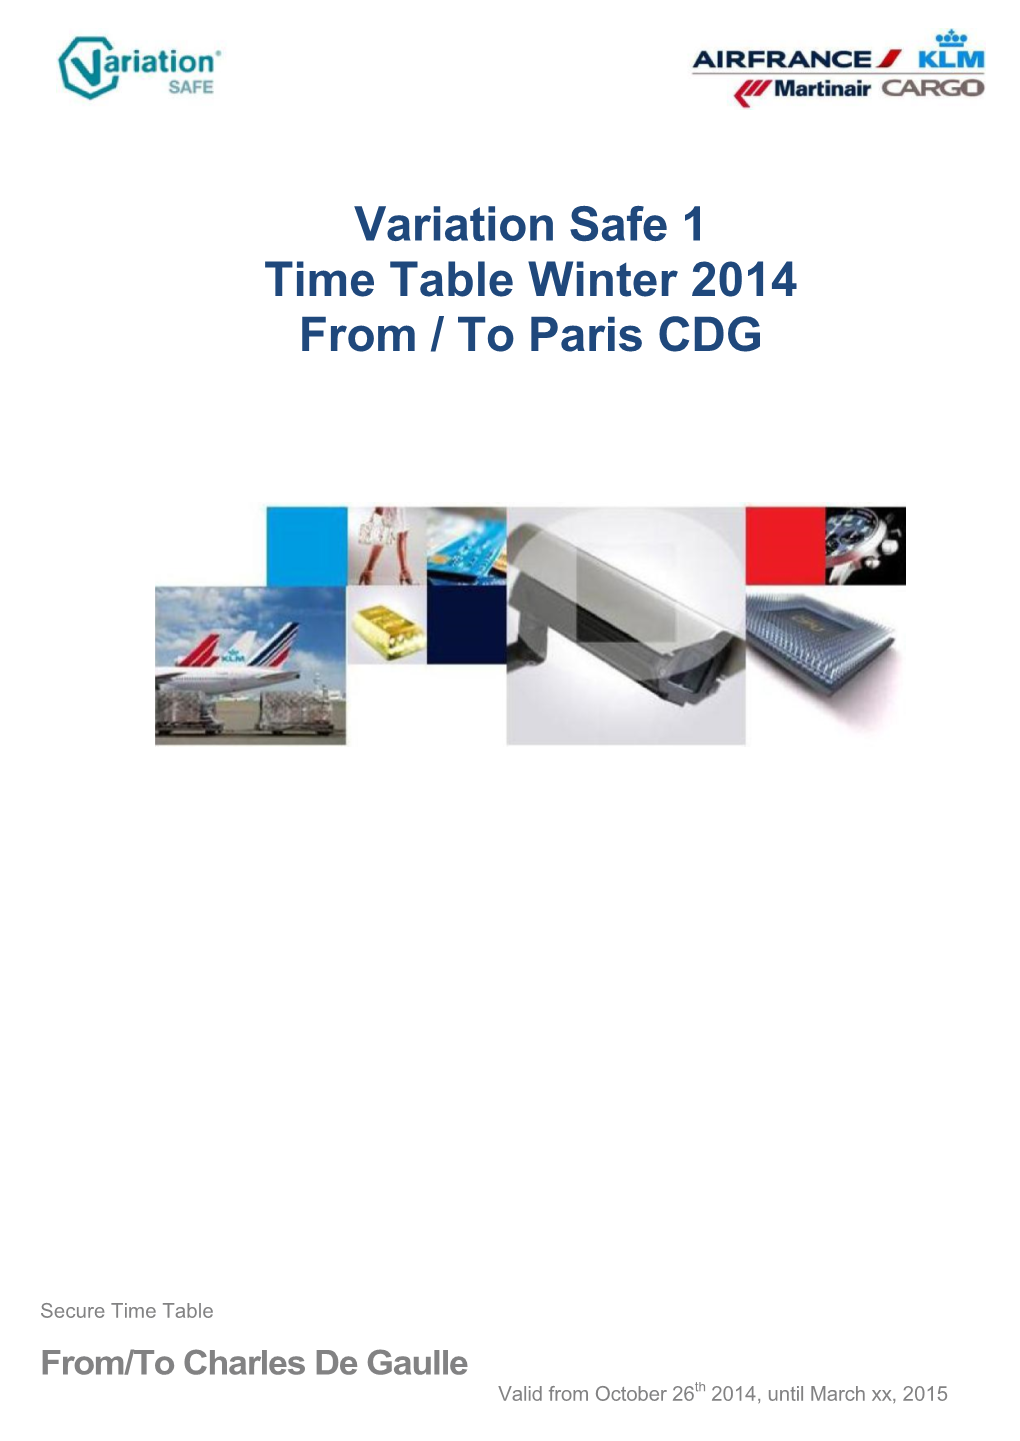 Variation Safe 1 Time Table Winter 2014 from / to Paris CDG